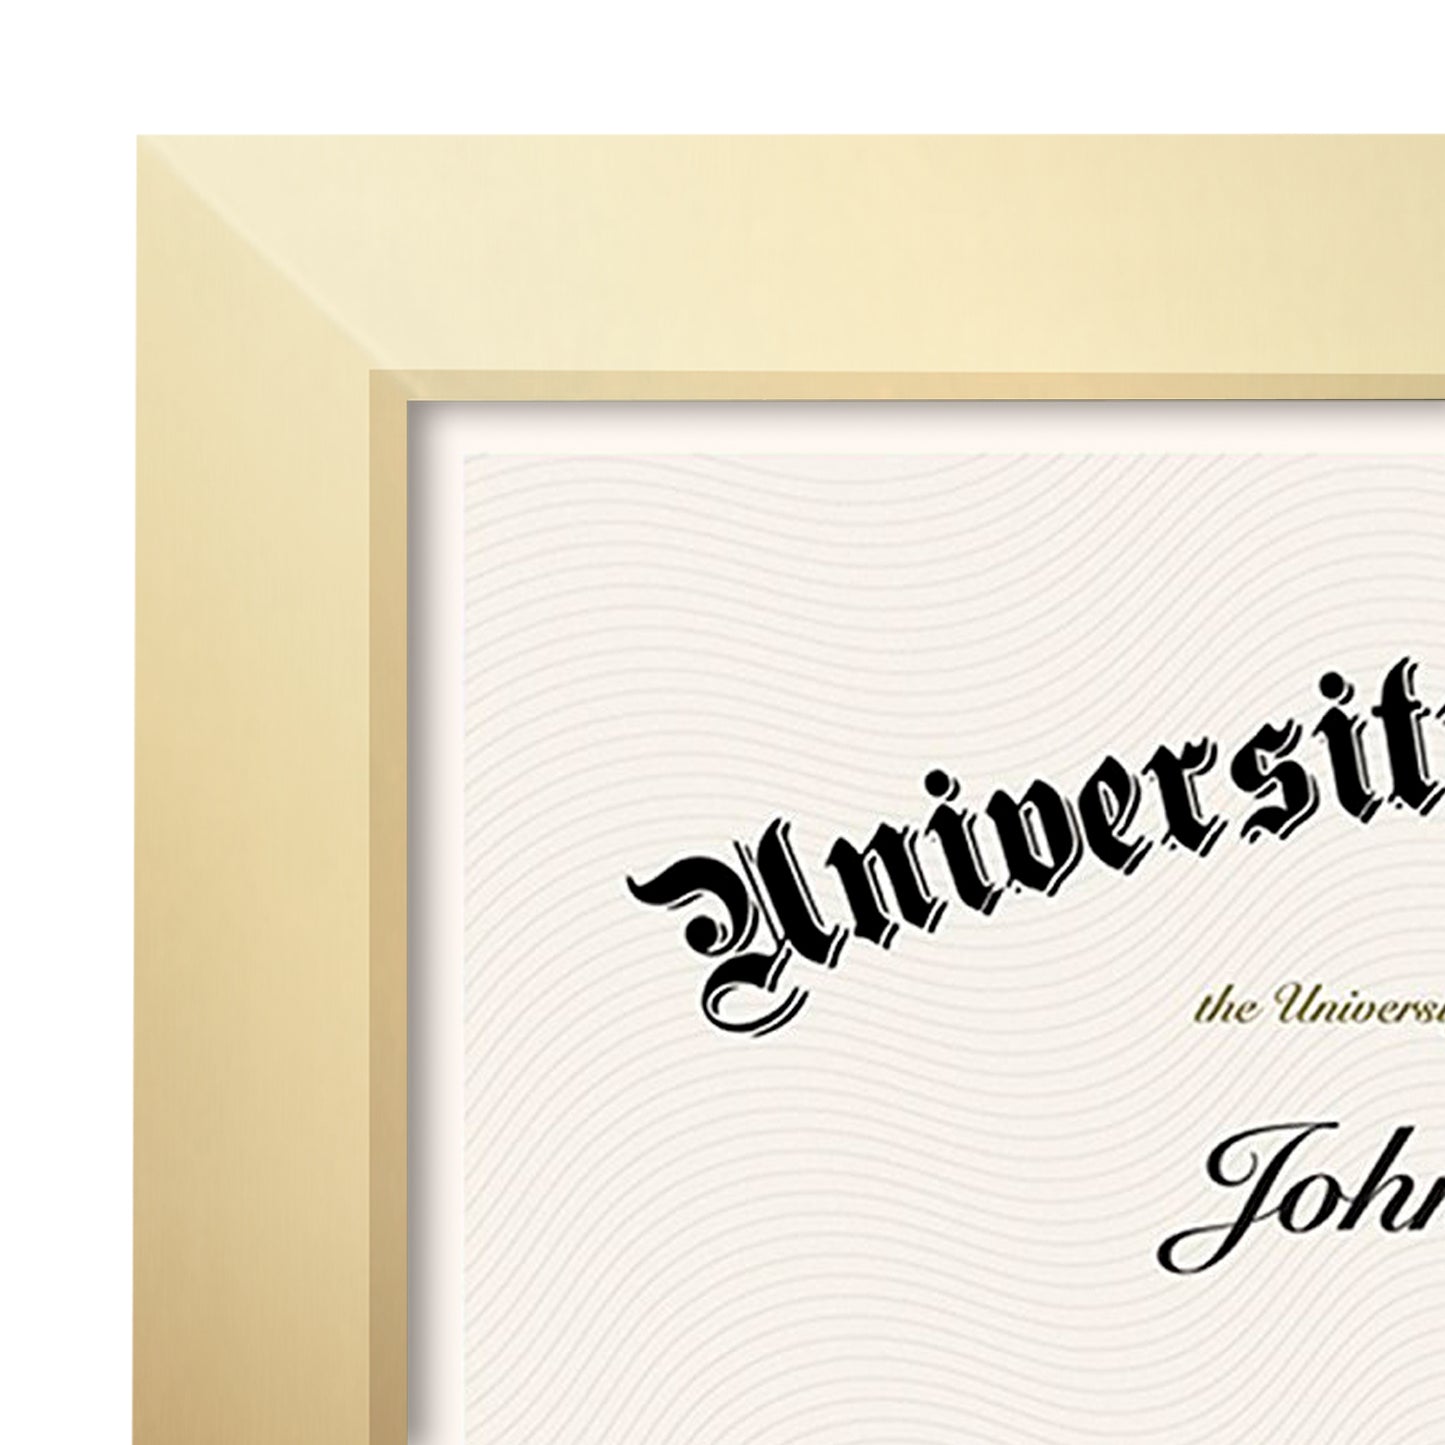 8.5x11 Diploma Frame | Choose Your Color